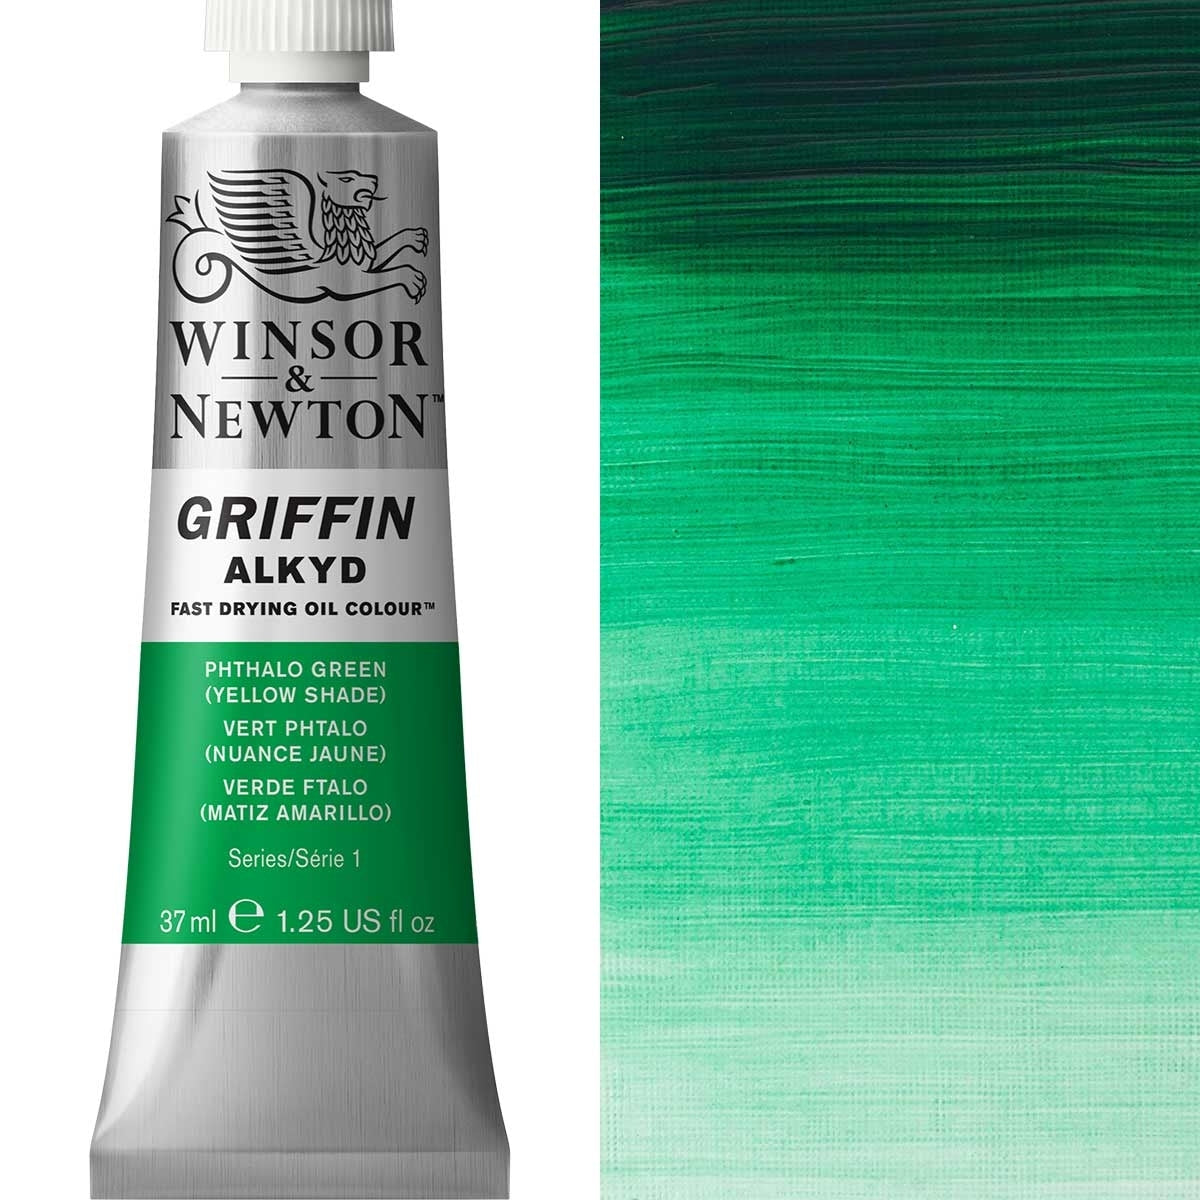 Winsor and Newton - Griffin ALKYD Oil Colour - 37ml - Phthalo Green Yellow